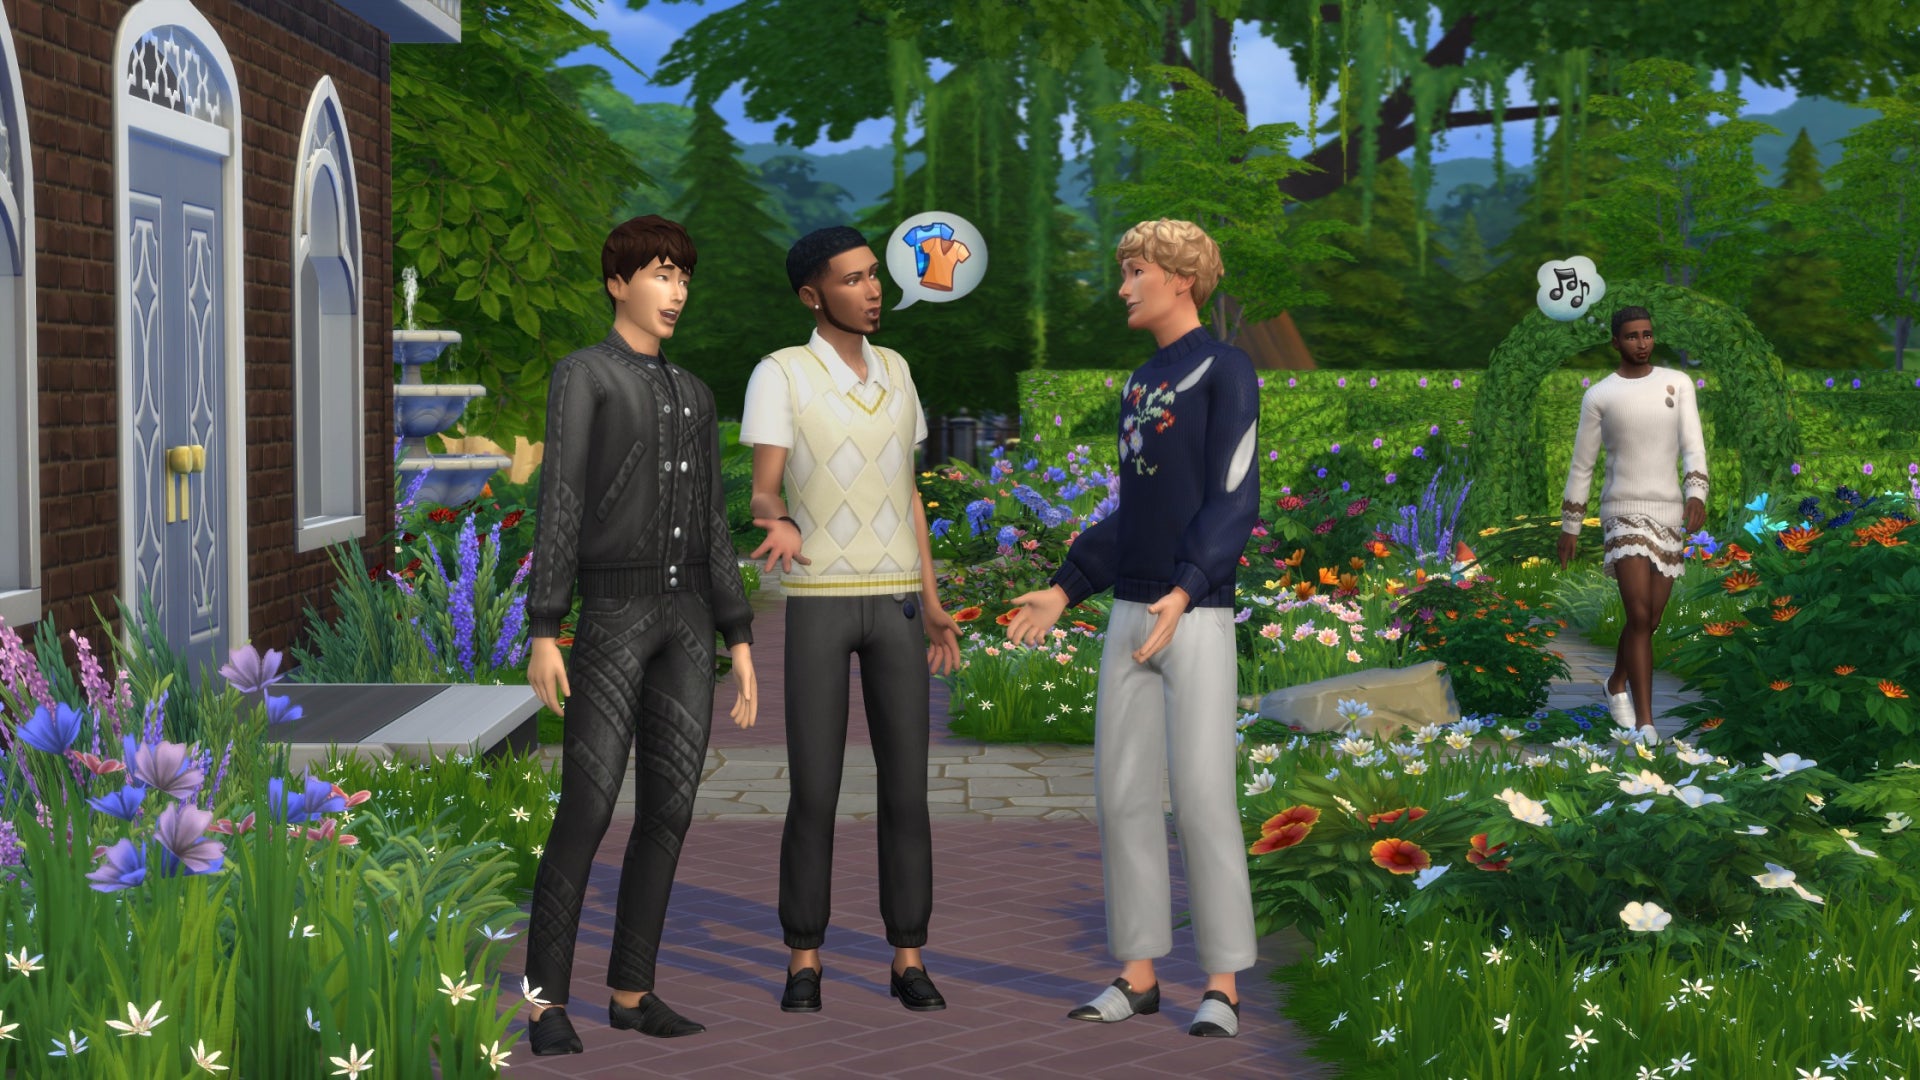 Asset from The Sims 4's Modern Menswear DLC Kit showing three sims talking to each other